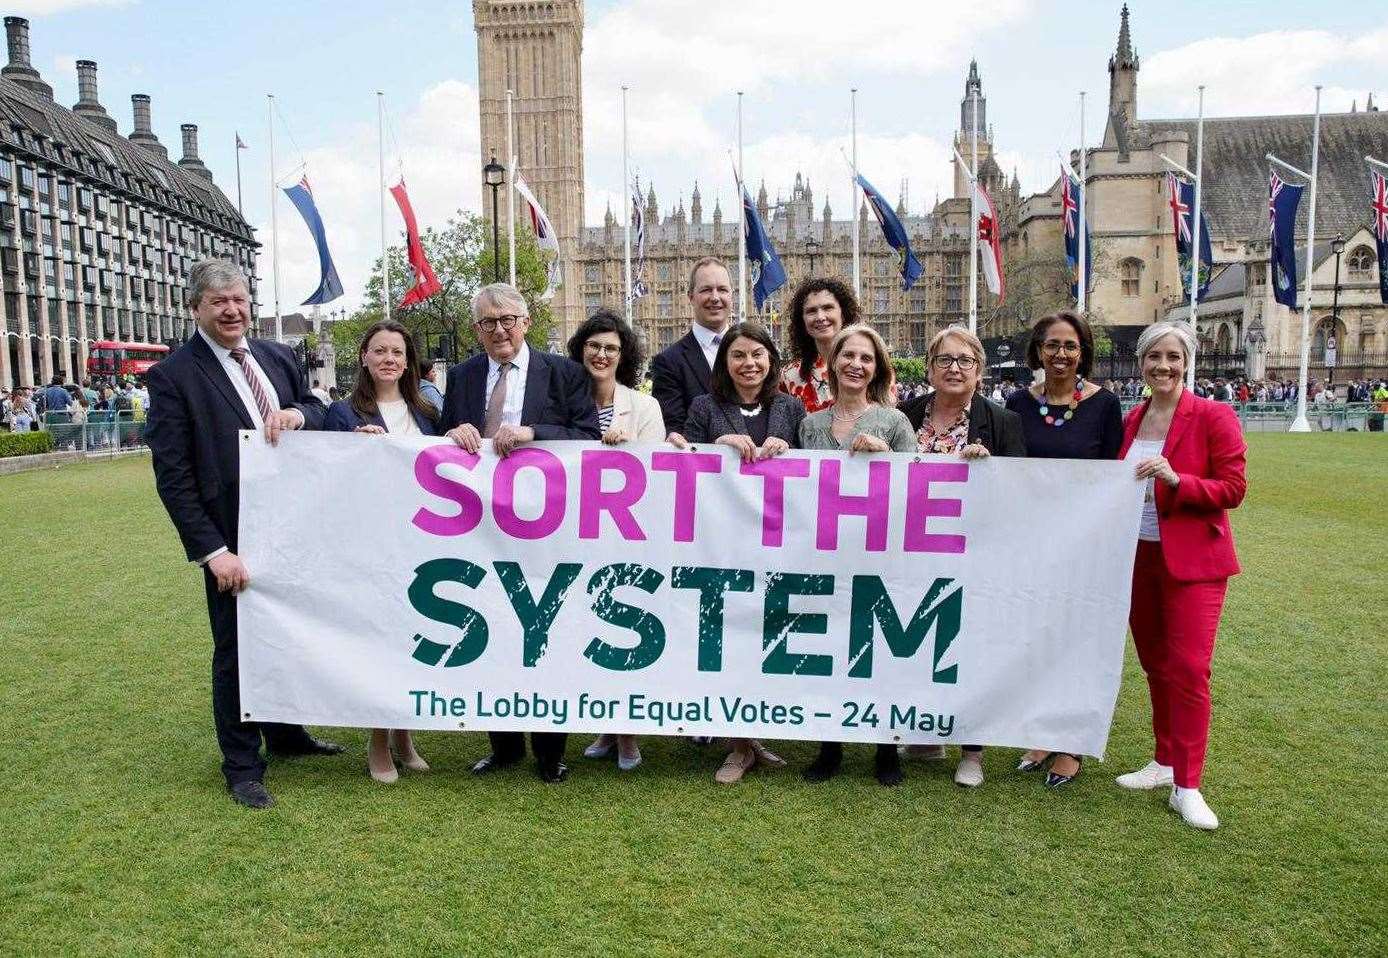 Jamie Stone with Liberal Democrats colleagues at the Sort the System event in Parliament Square.